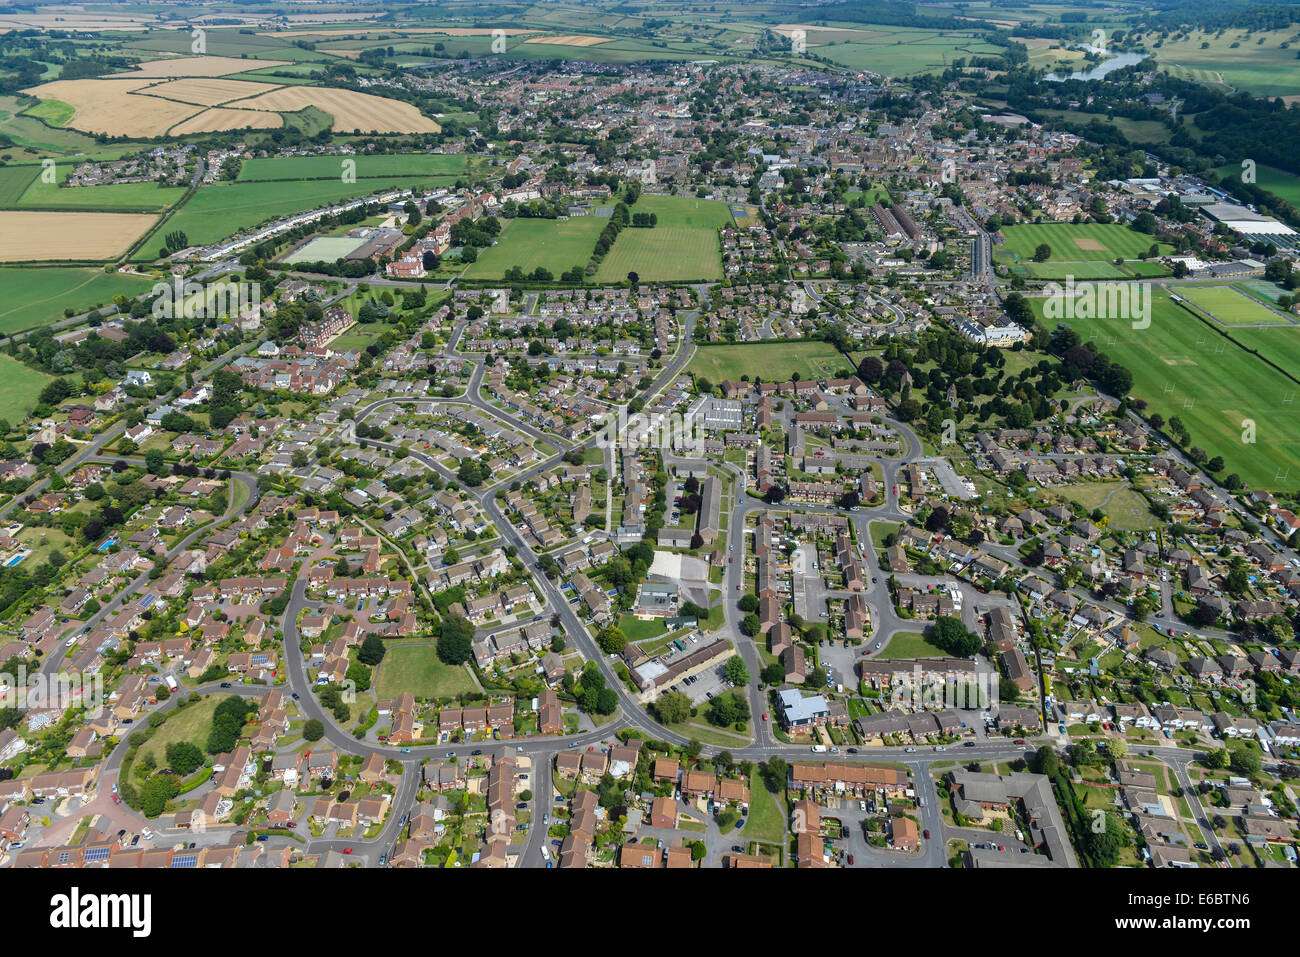 An aerial view of Sherborne, a market town in Dorset, Southern England Stock Photo